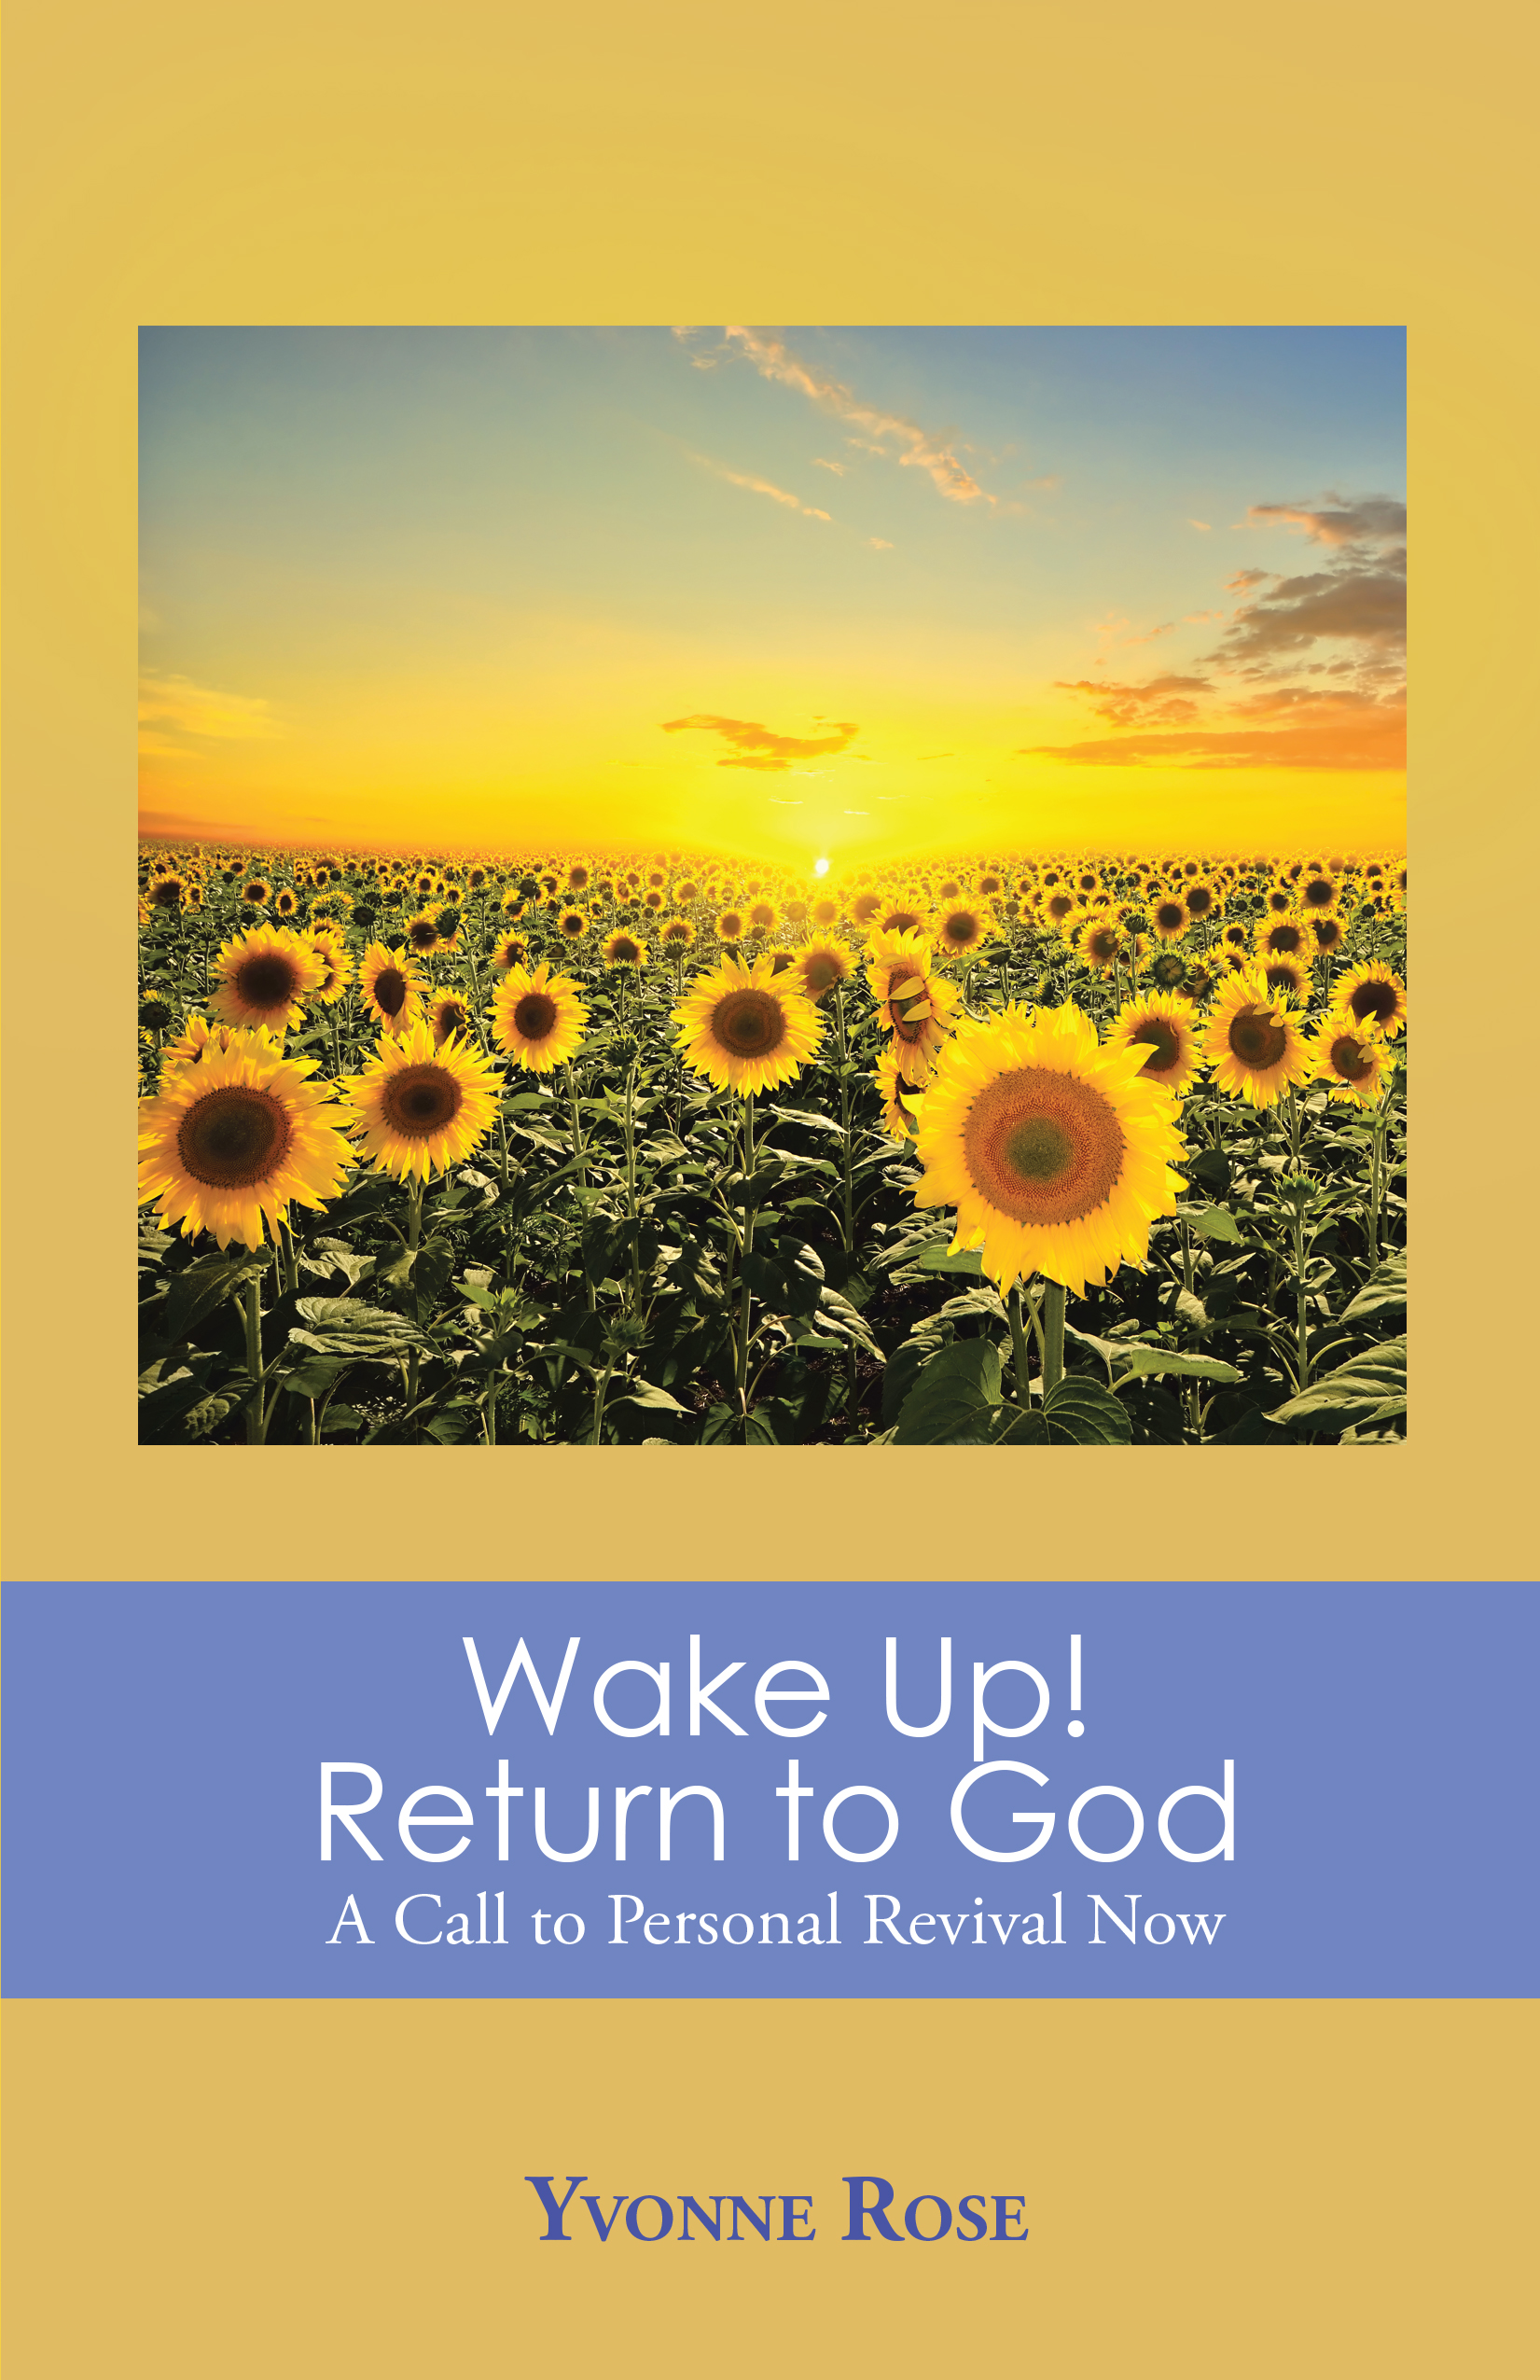 Yvonne Rose’s Newly Released “Wake Up! Return to God: A Call to Personal Revival Now” Ignites Spiritual Awakening